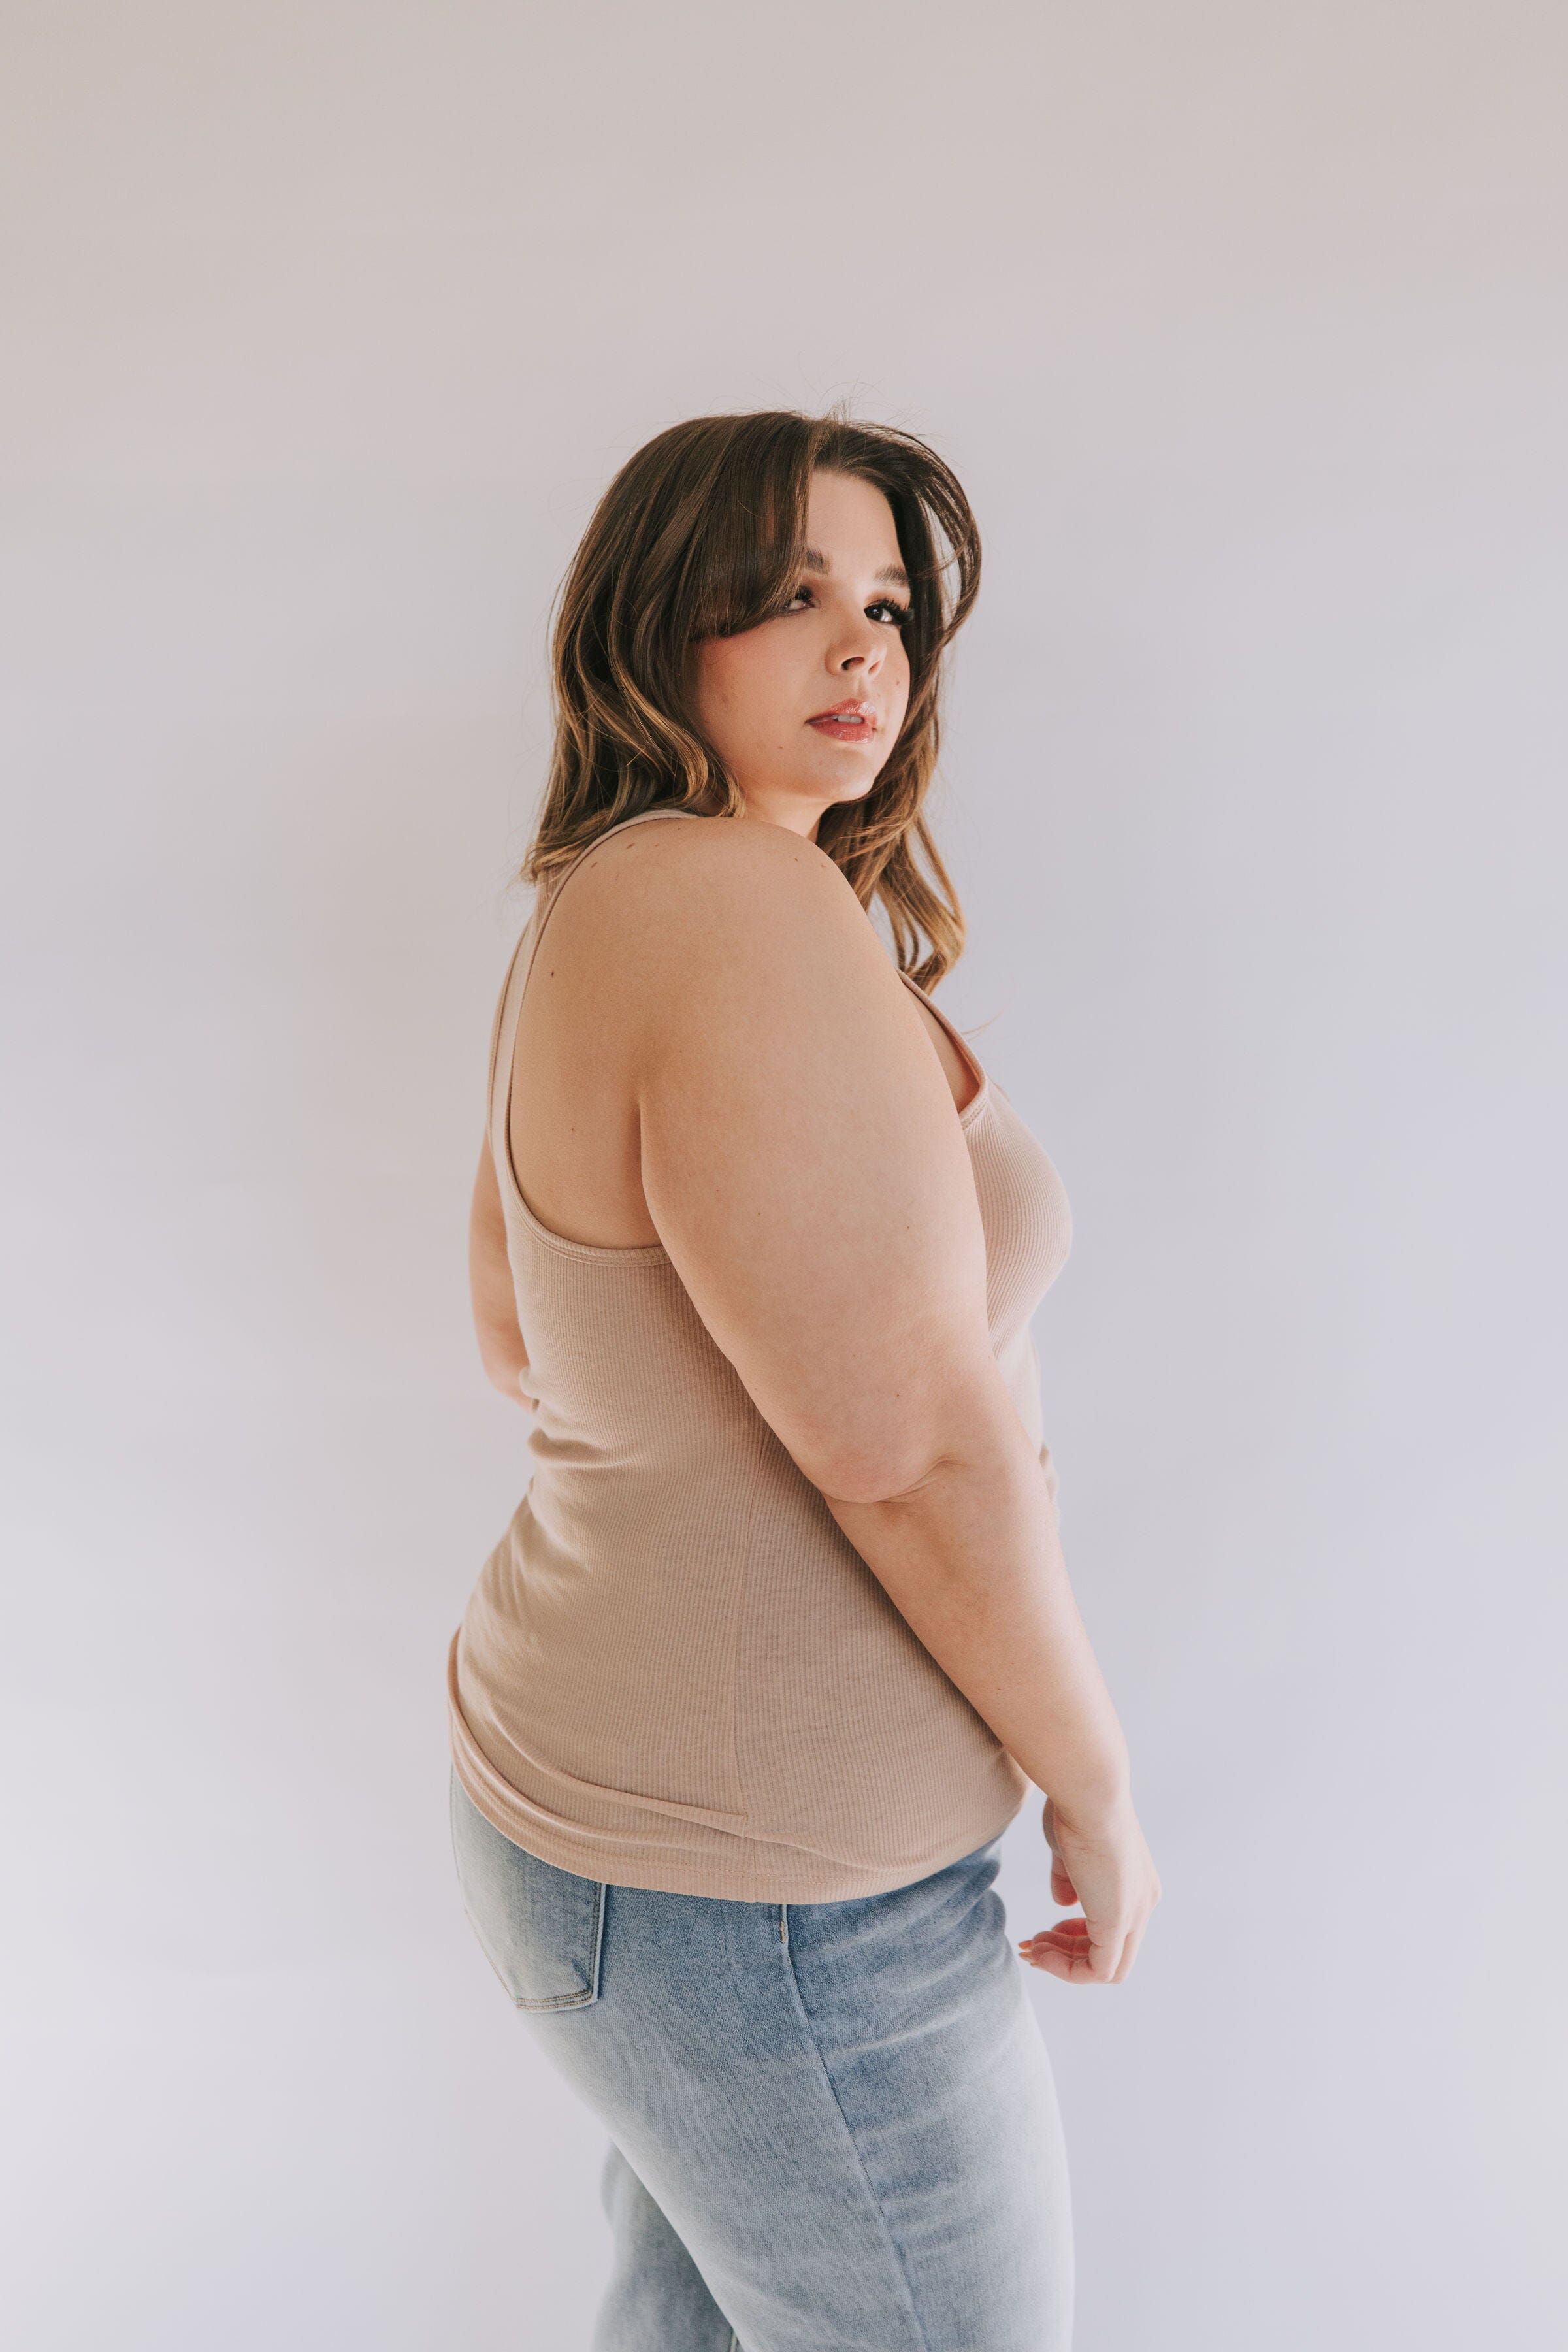 PLUS SIZE - Backing Down Tank Top - 3 Colors!